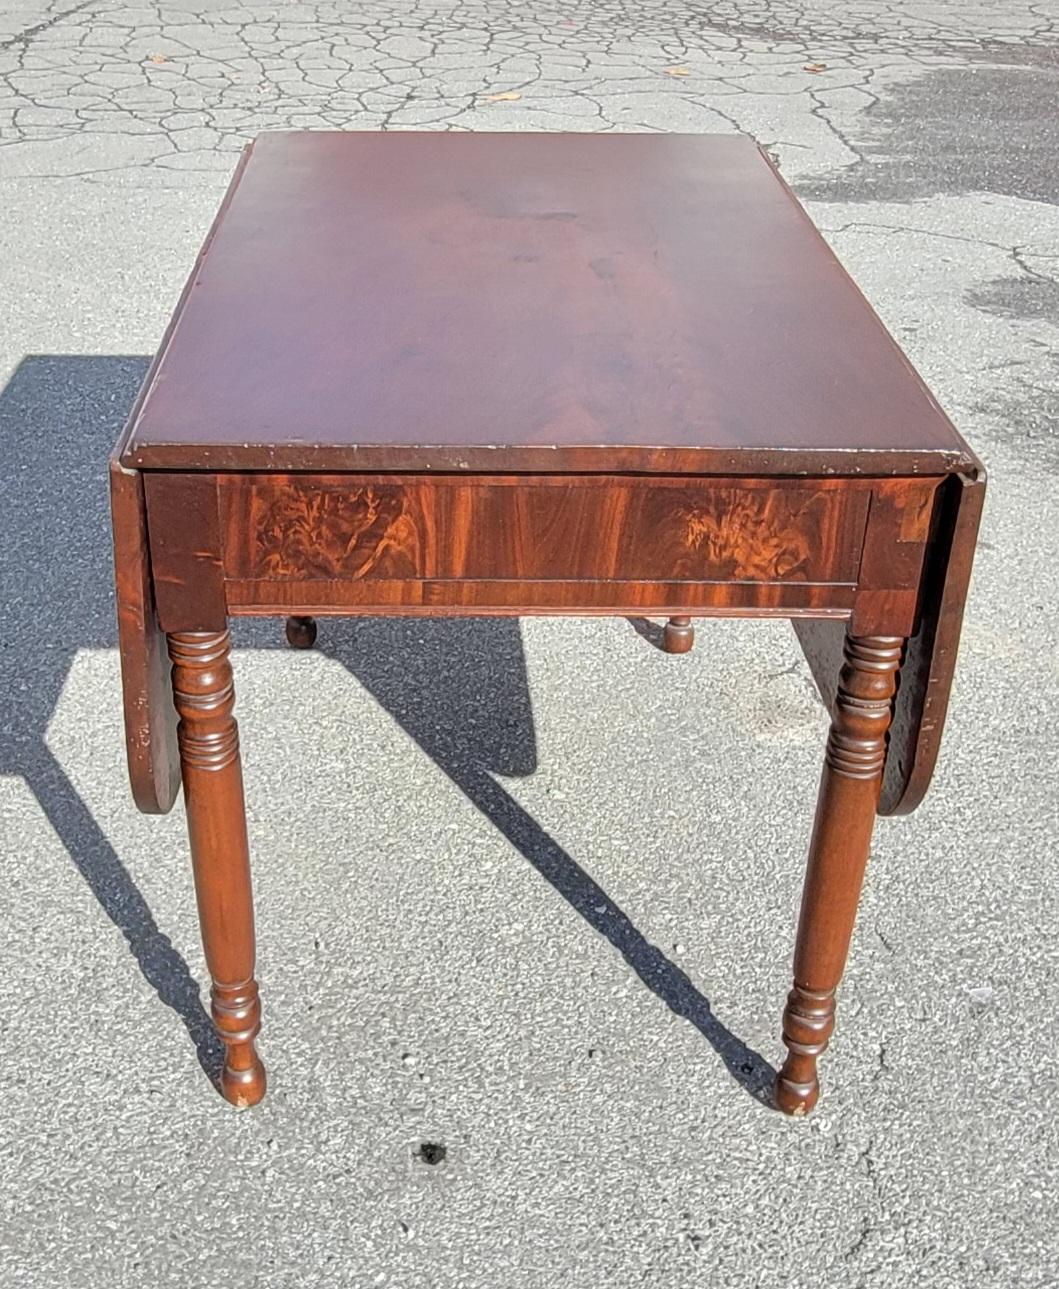 19th Century American Empire Federal Flame Mahogany Drop-Leaf Dining Table For Sale 10